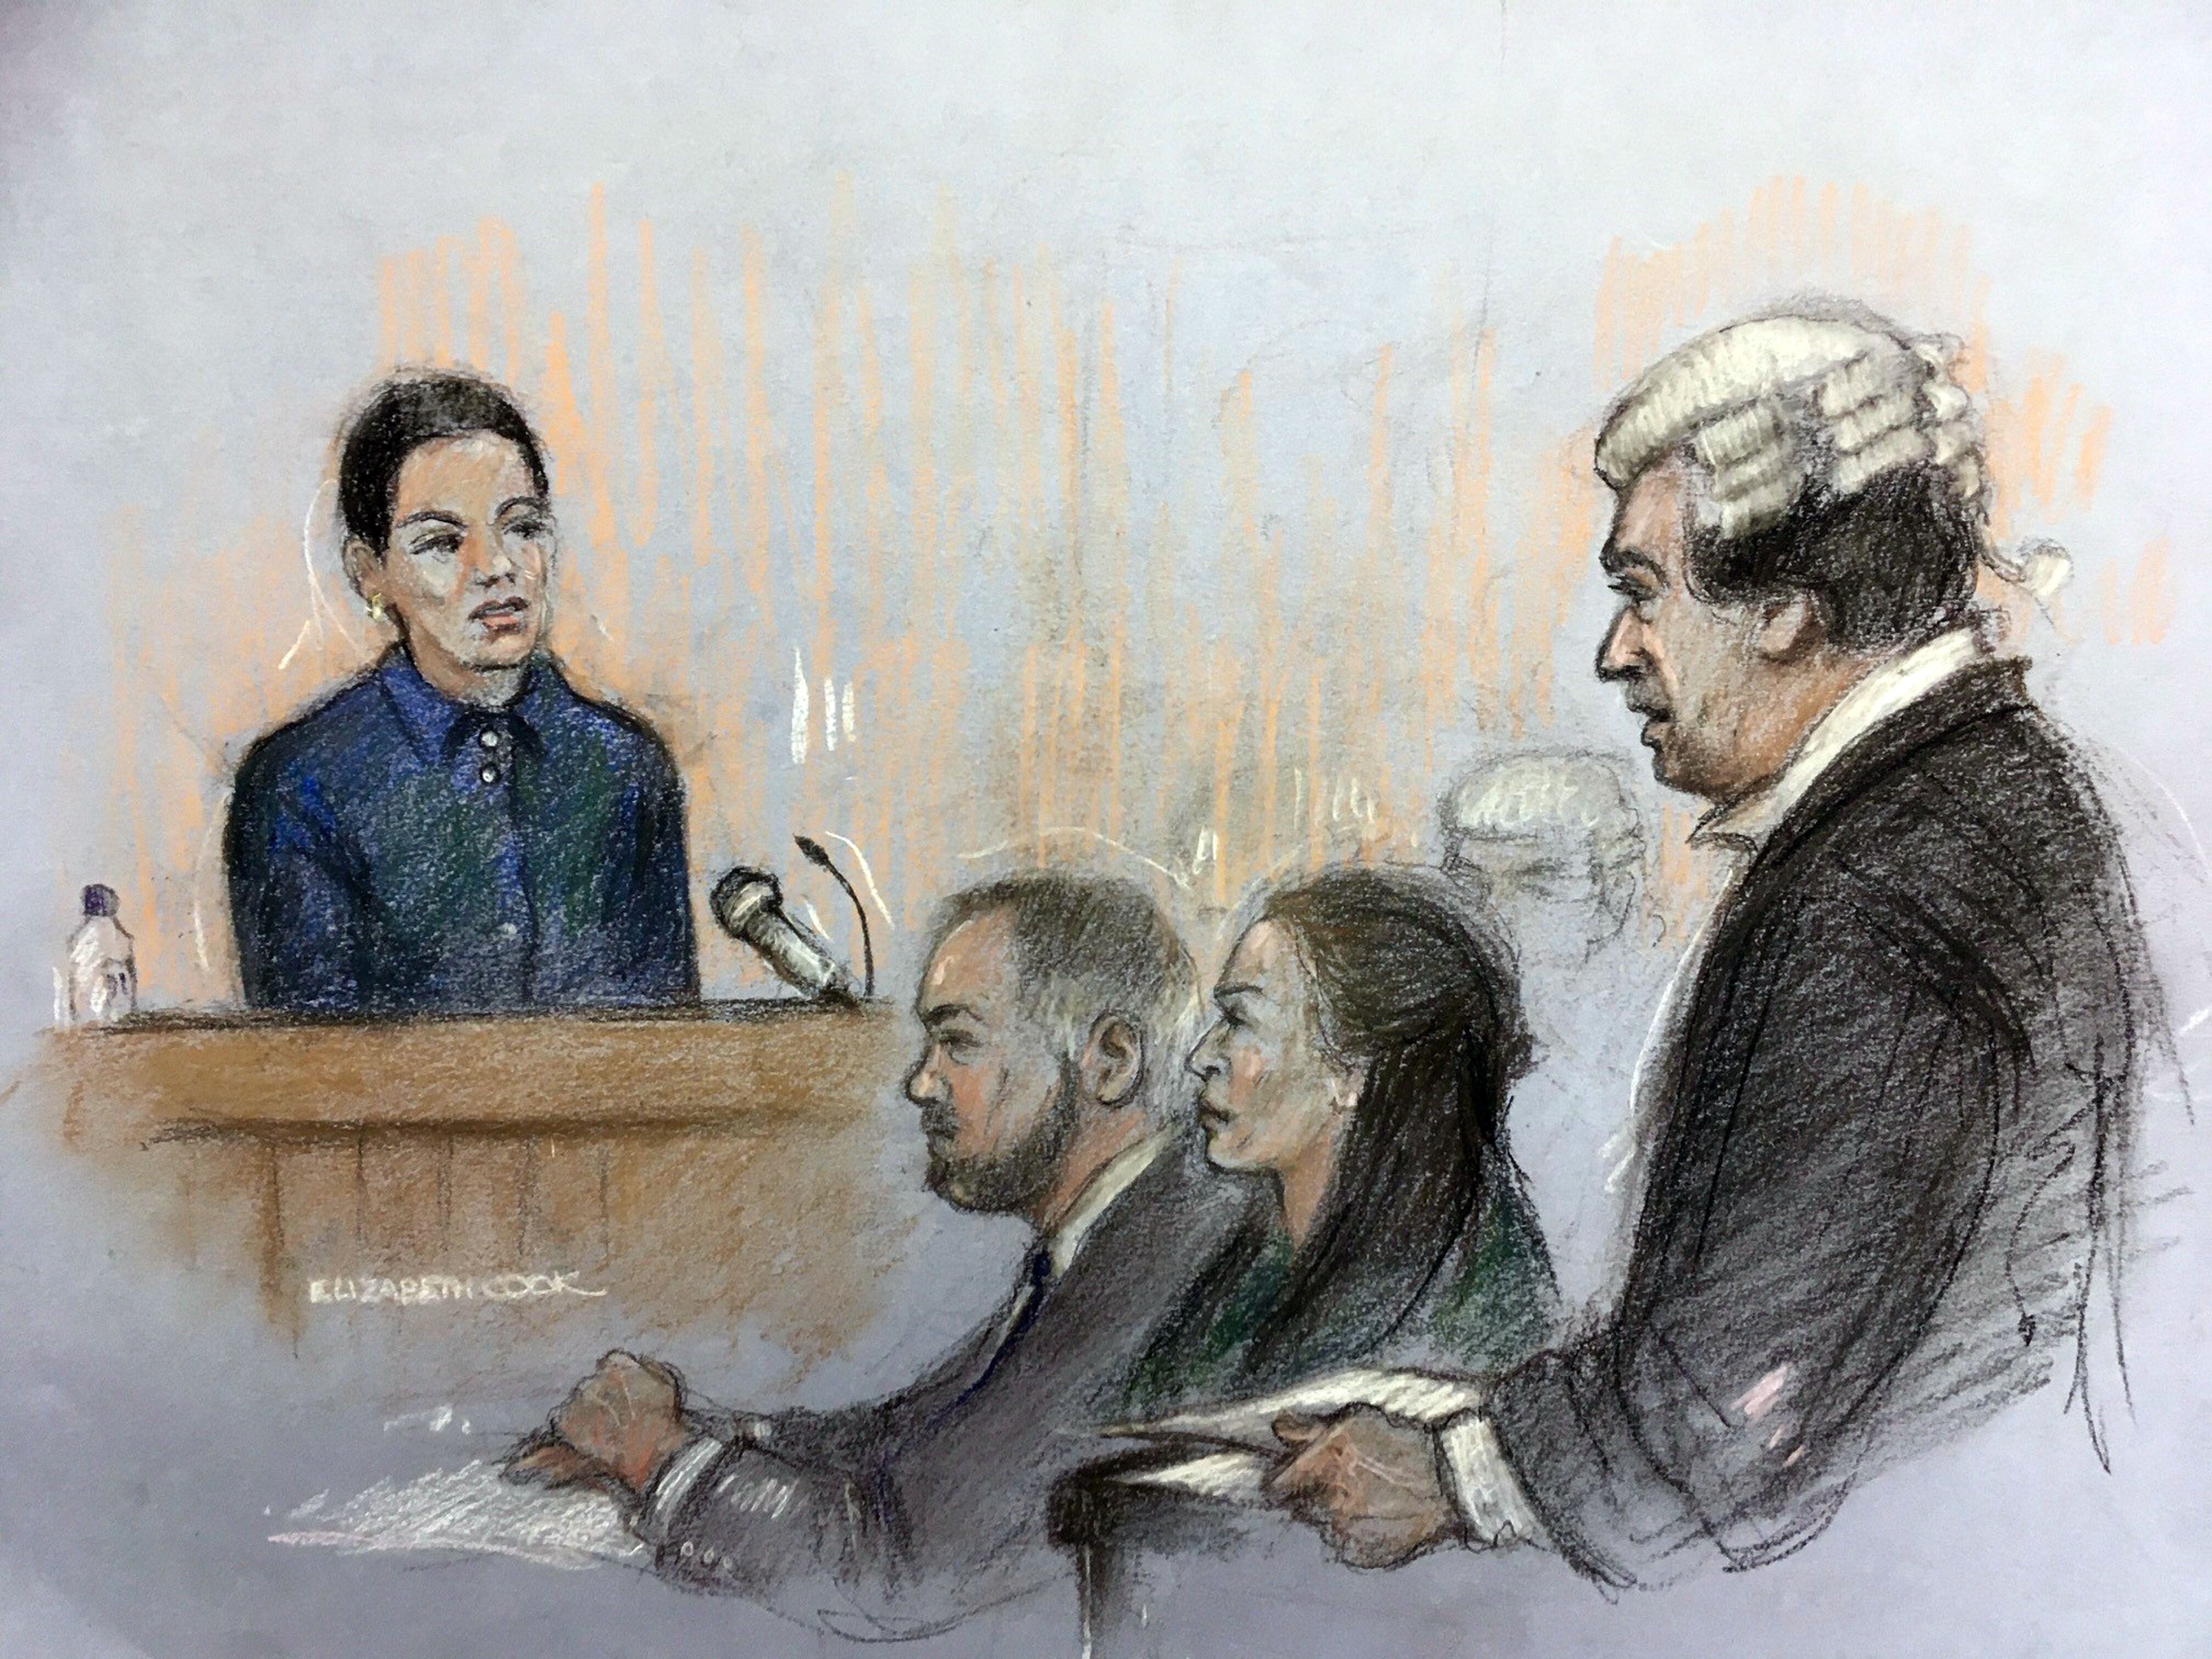 Court sketch of Coleen Rooney’s barrister David Sherborne (right) questioning Rebekah Vardy on the witness stand